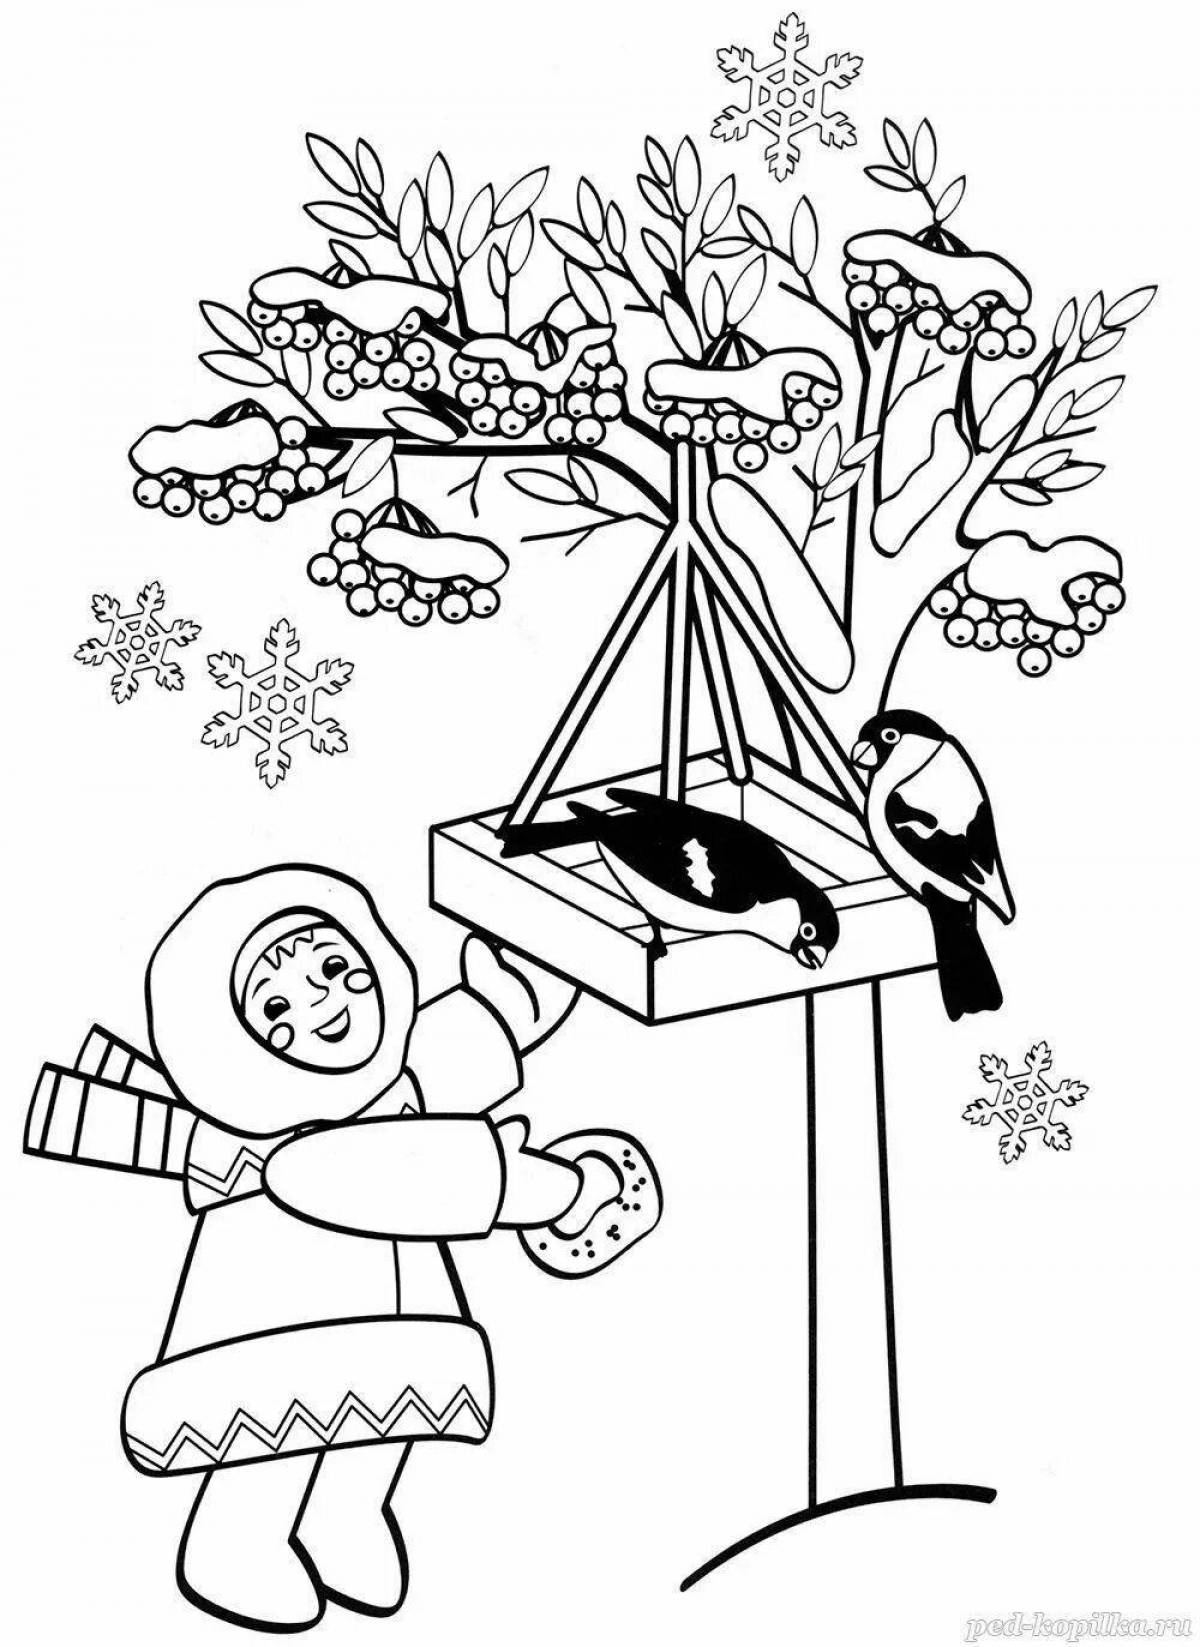 Colorful bird feeder coloring page for kids